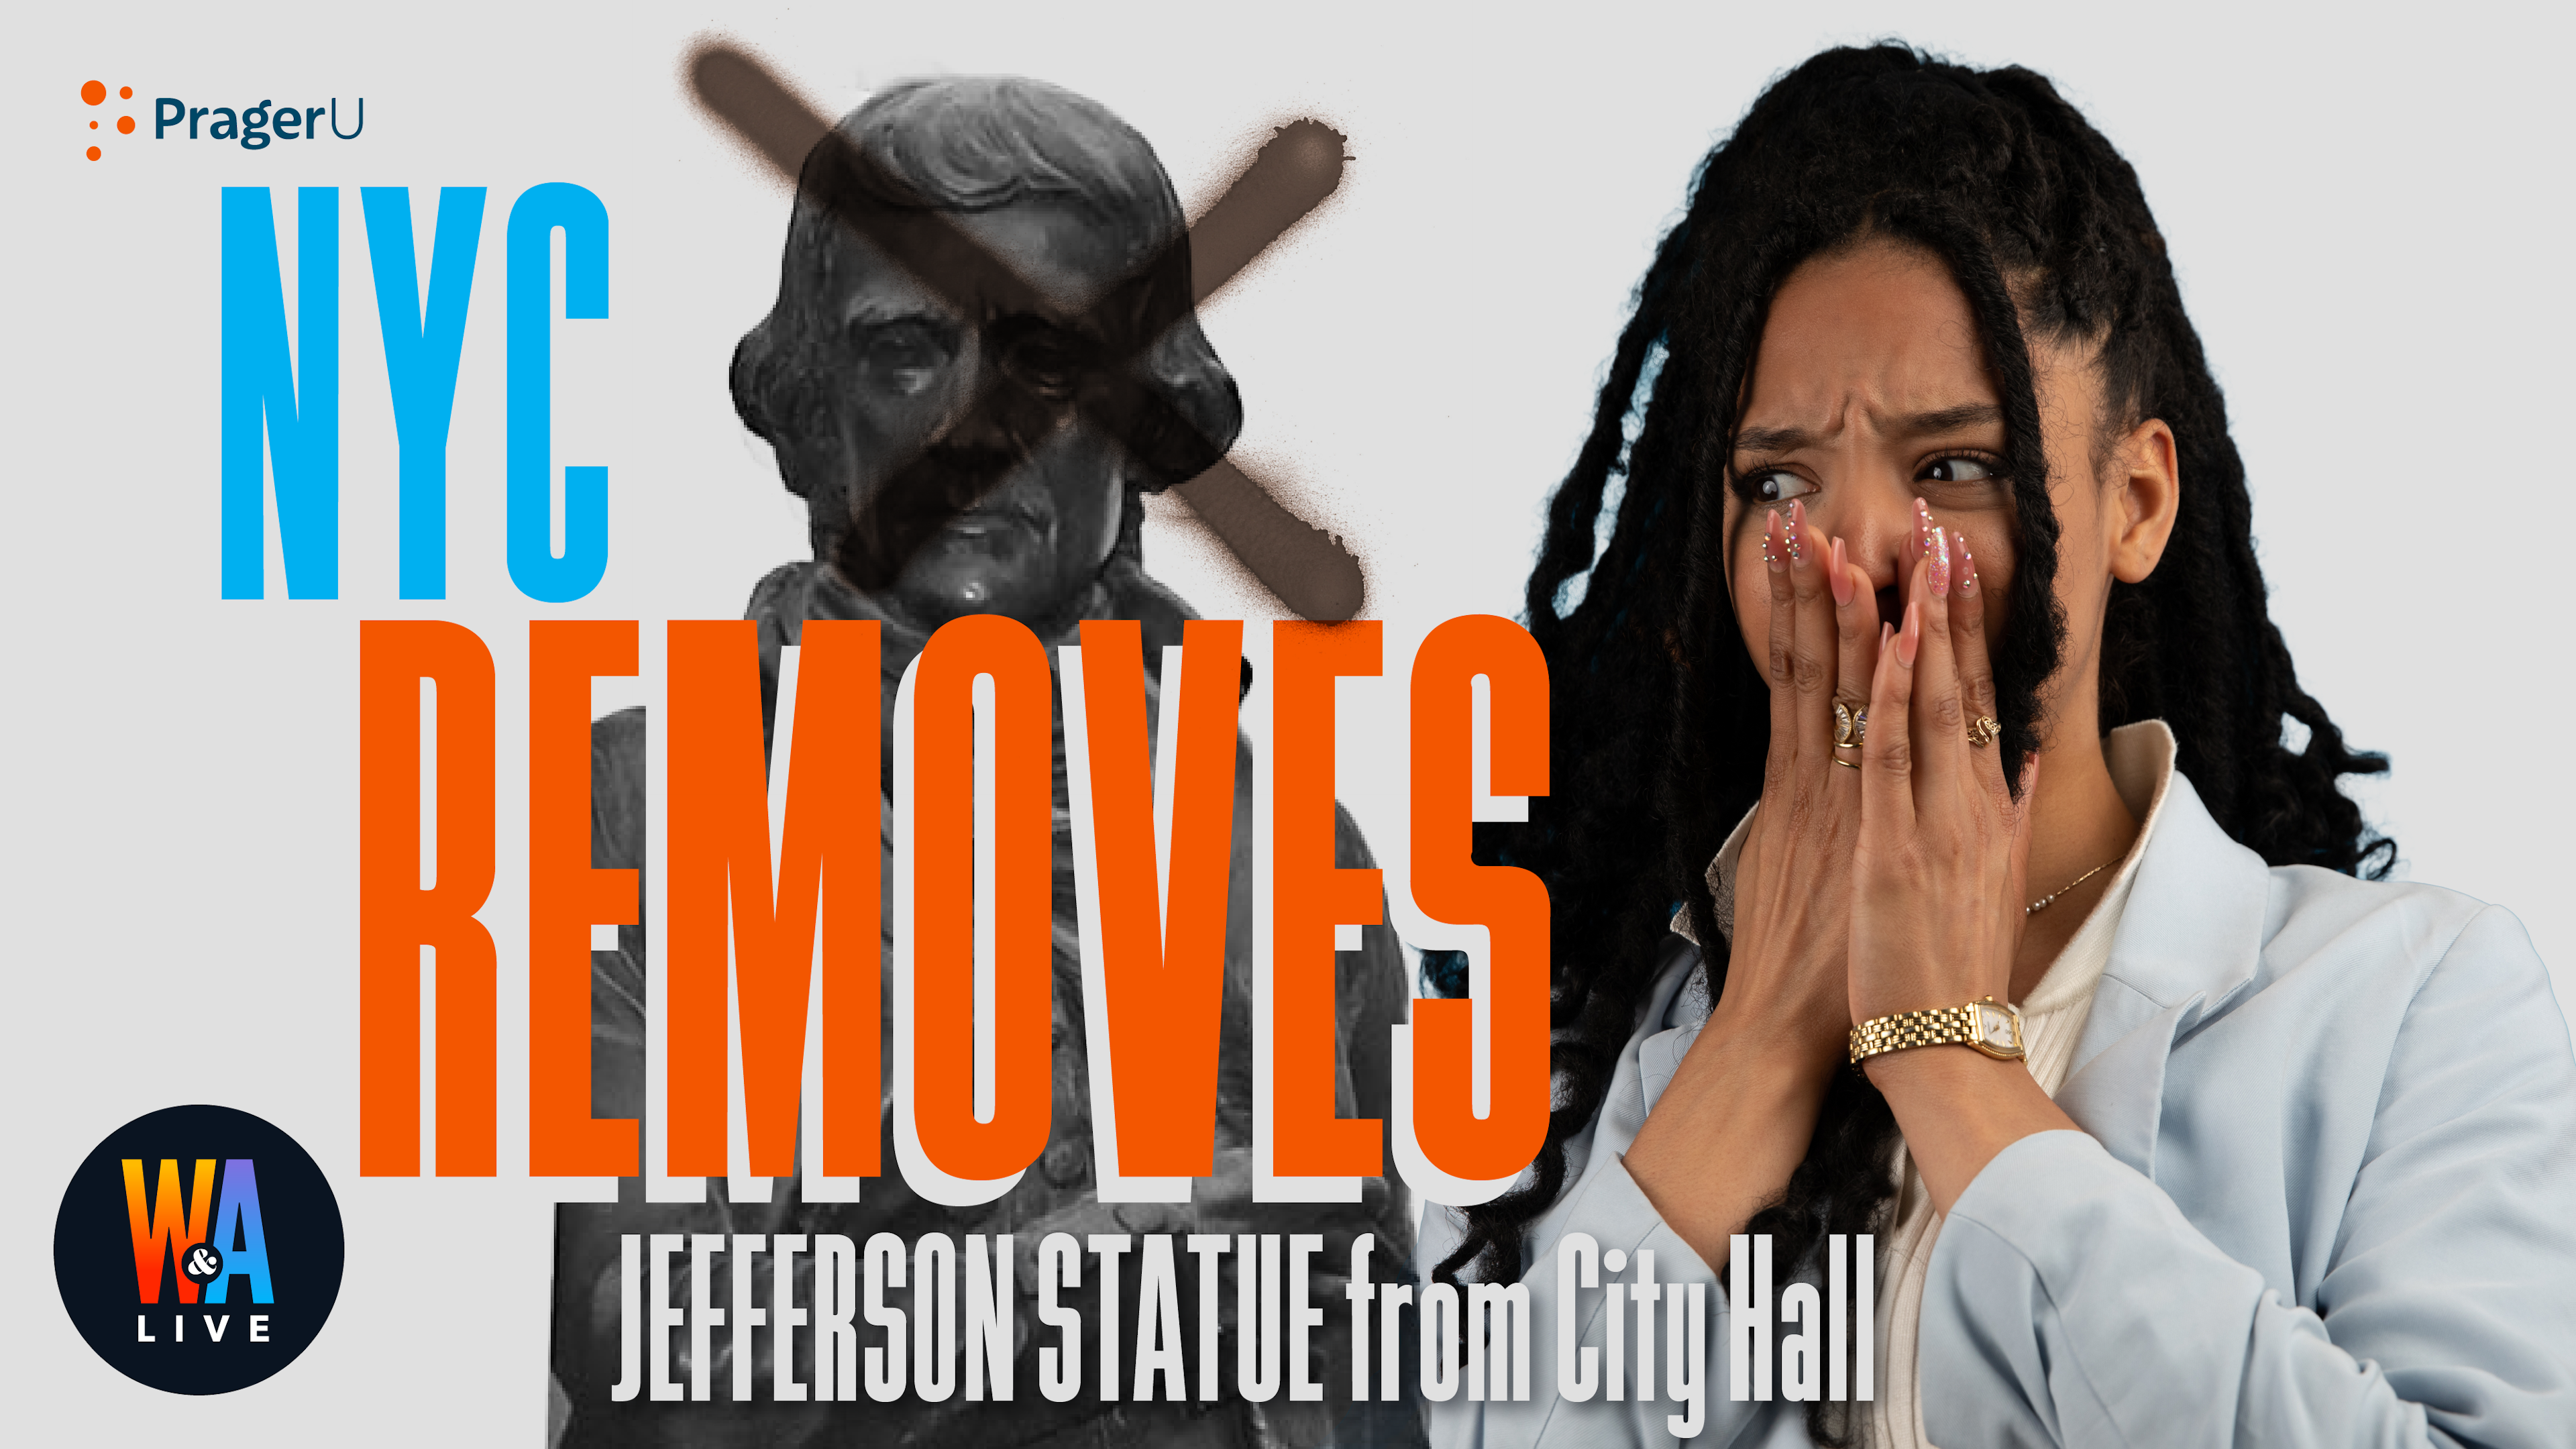 Thomas Jefferson Statue Removed from NYC City Hall: 11/23/2021